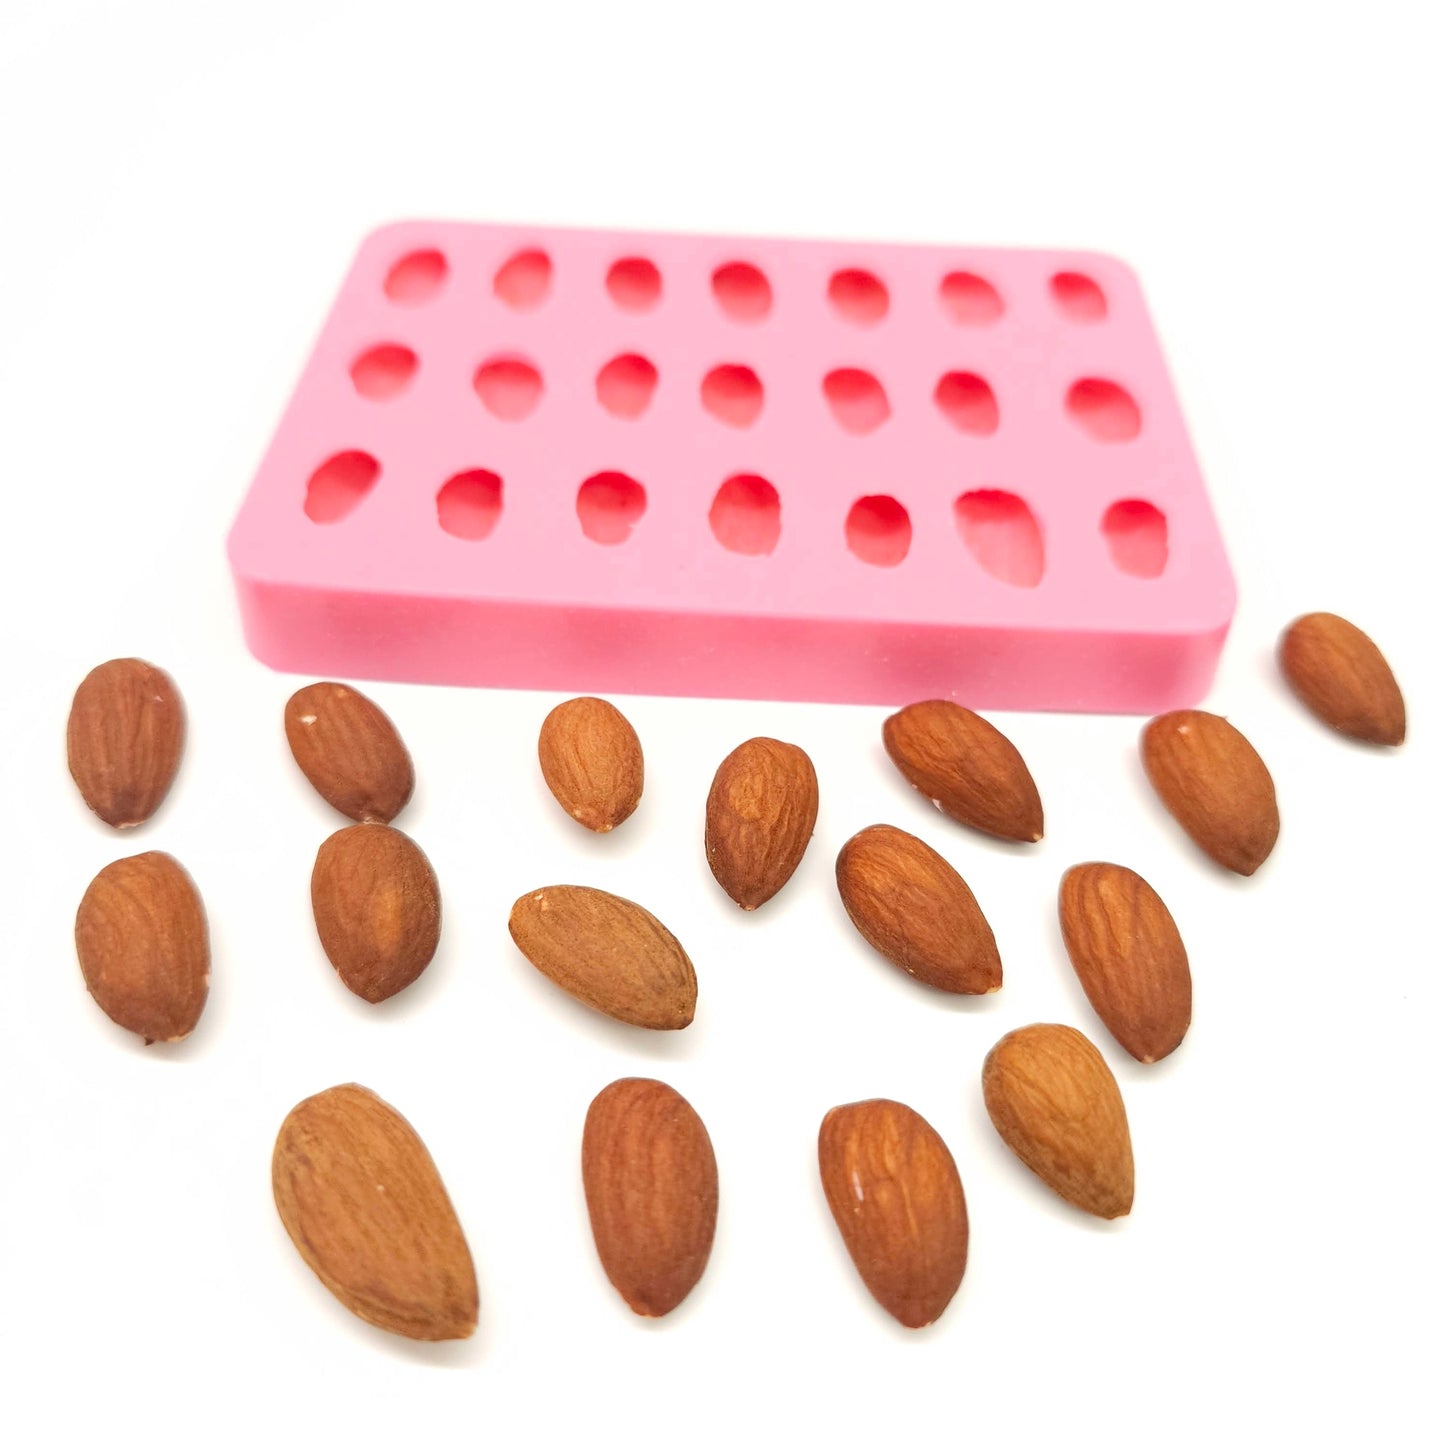 Almond Silicone Mold, realistic almods Soap and candle mold NS004